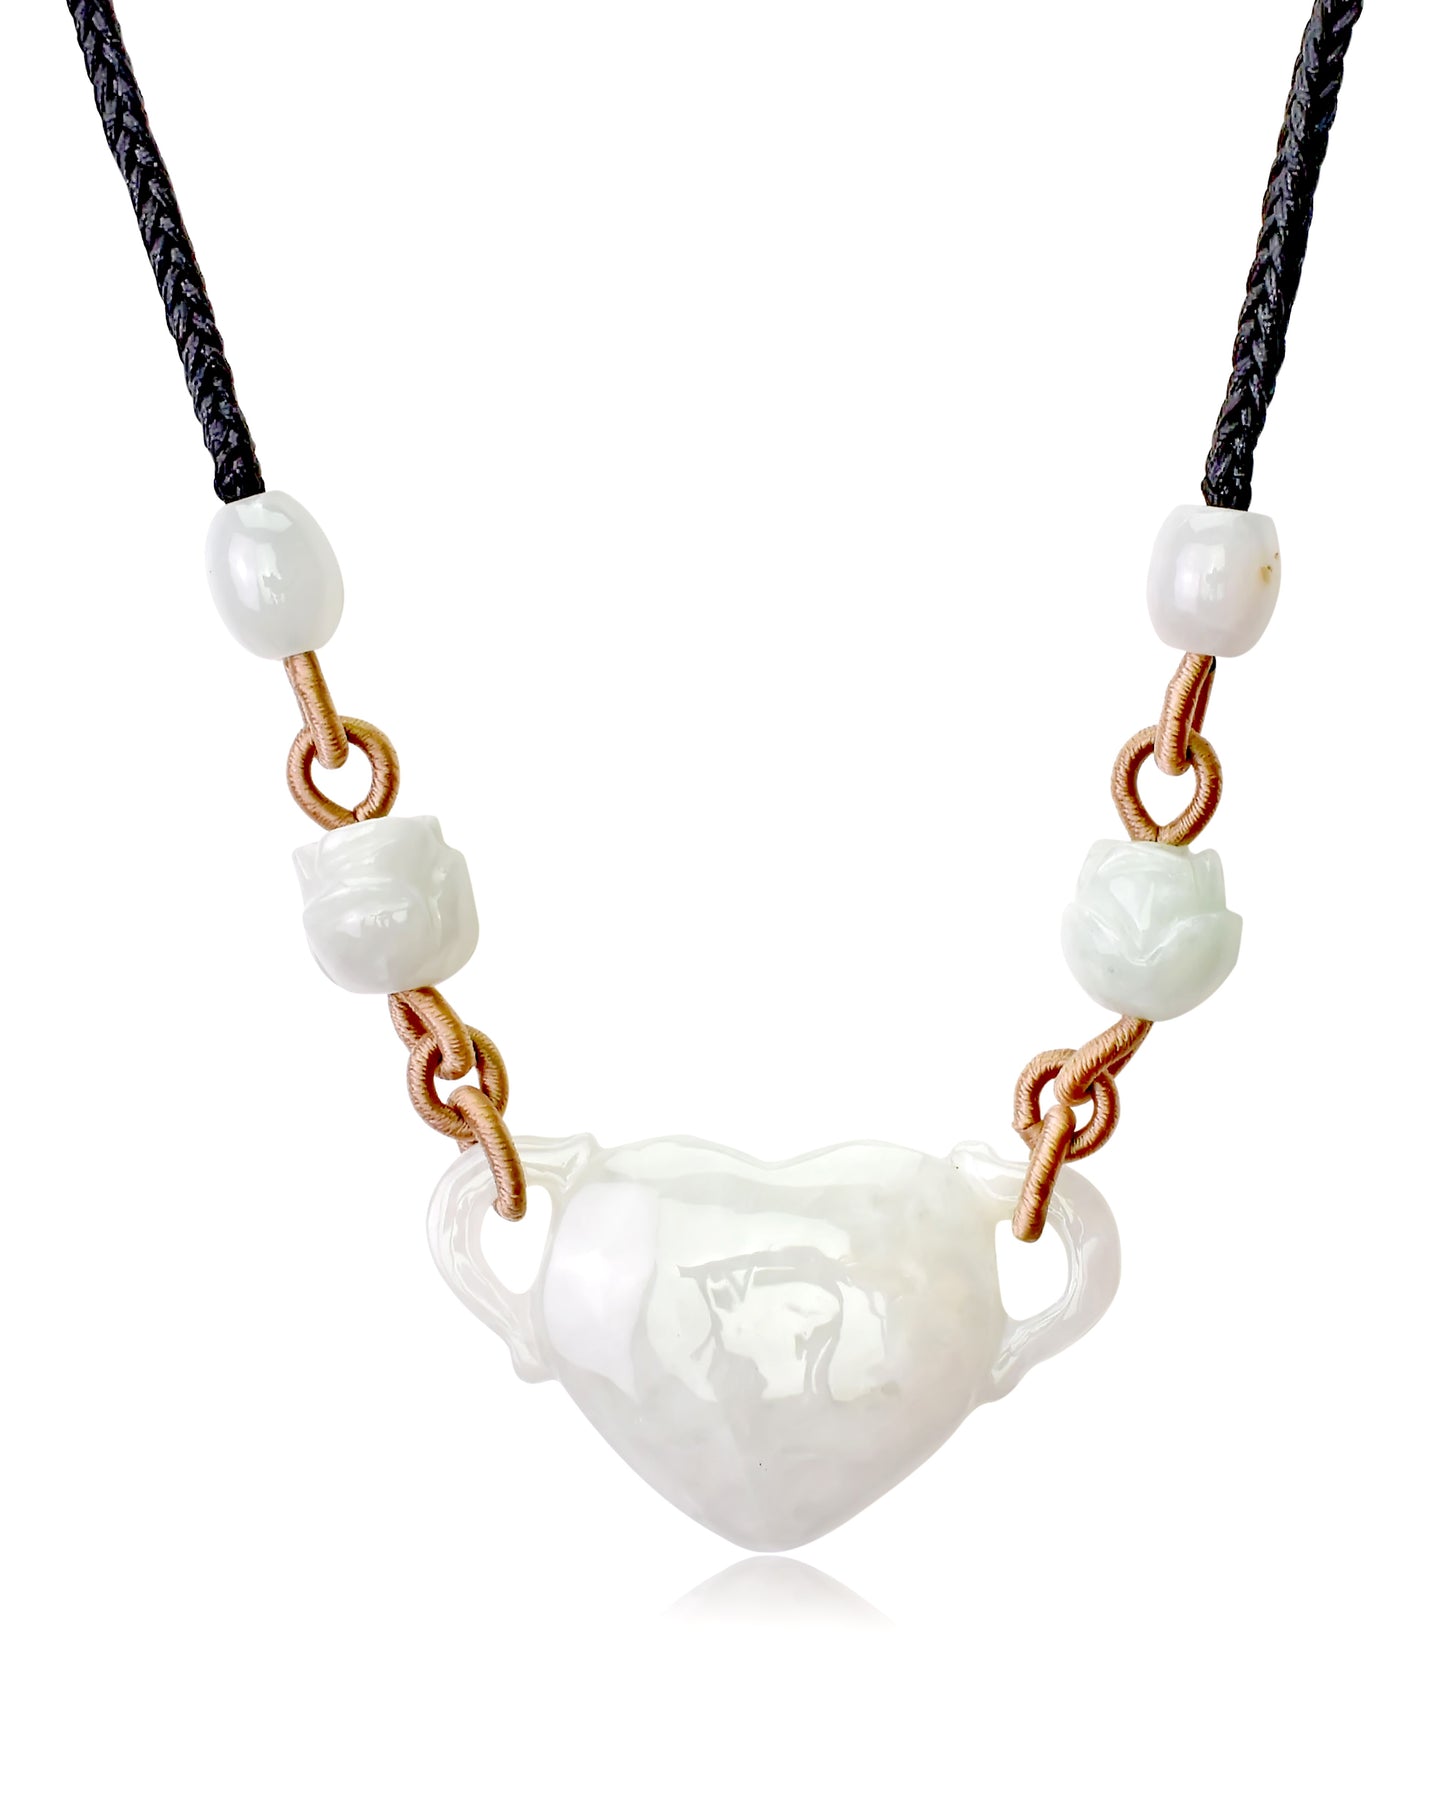 Show Your Love with Eye-Catching Heart-Shaped Jade Necklace